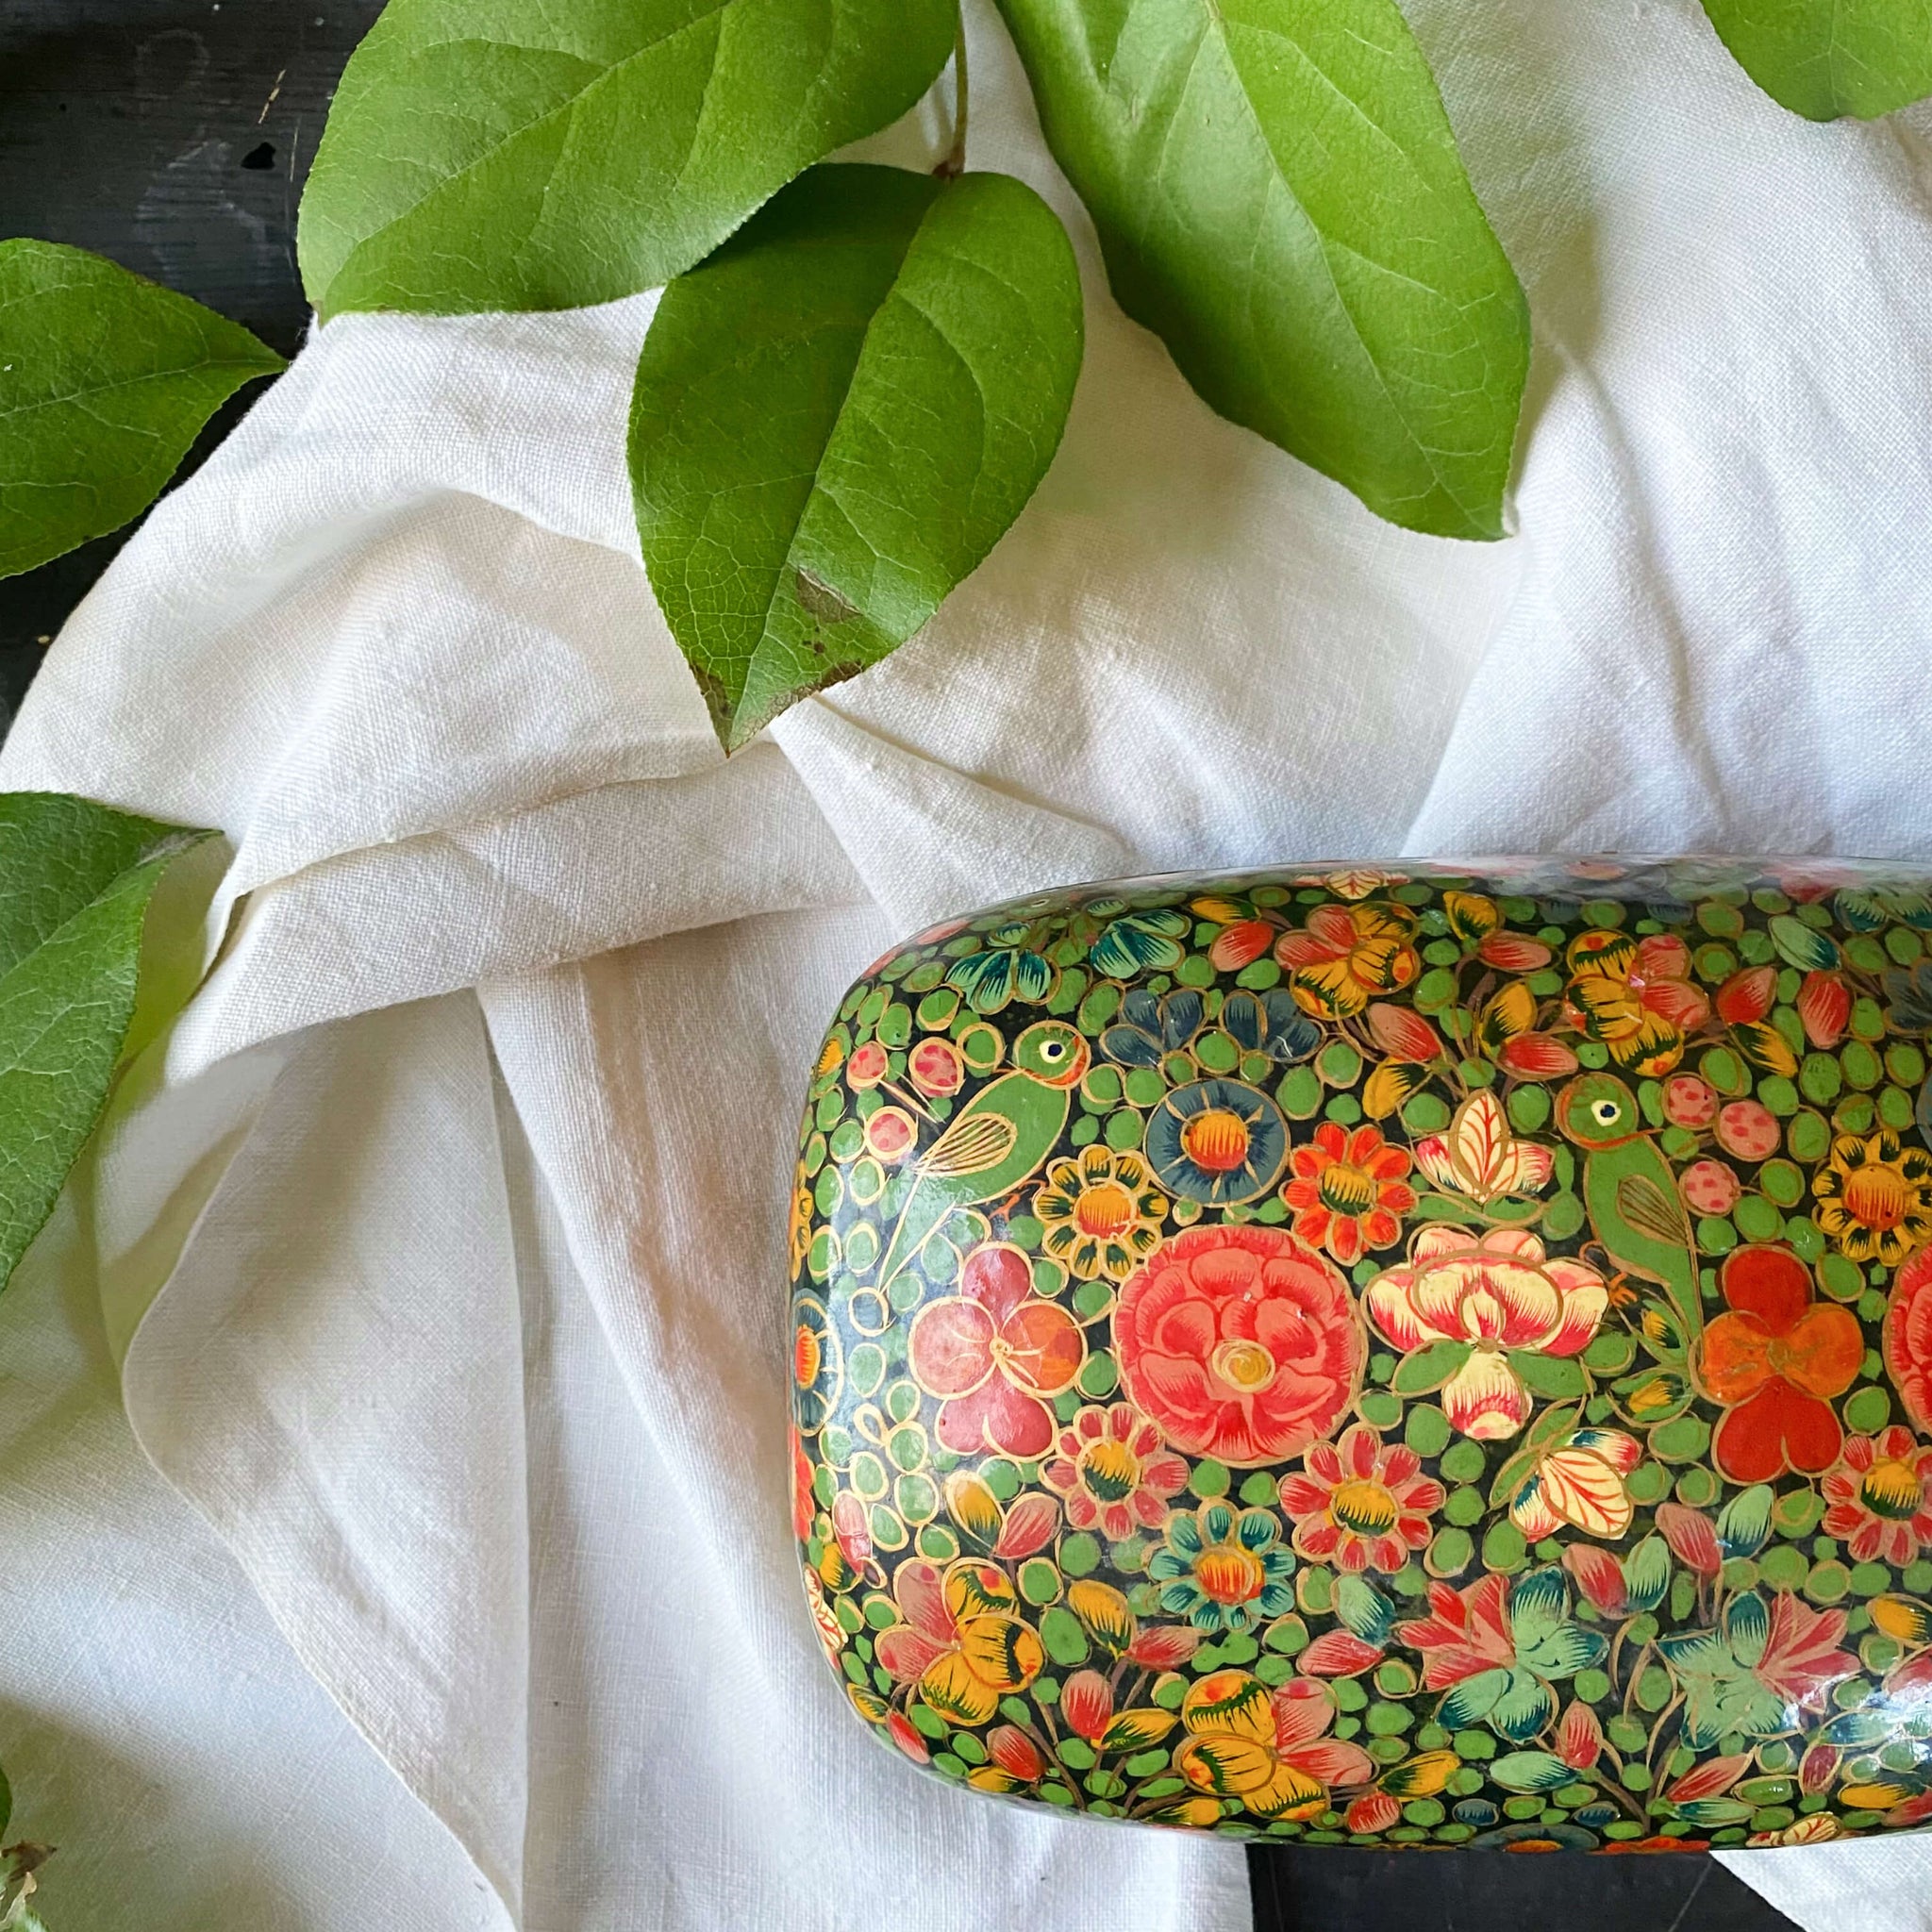 Vintage Hand Painted Paper Mache Box Made in Kashmir by Putumayo